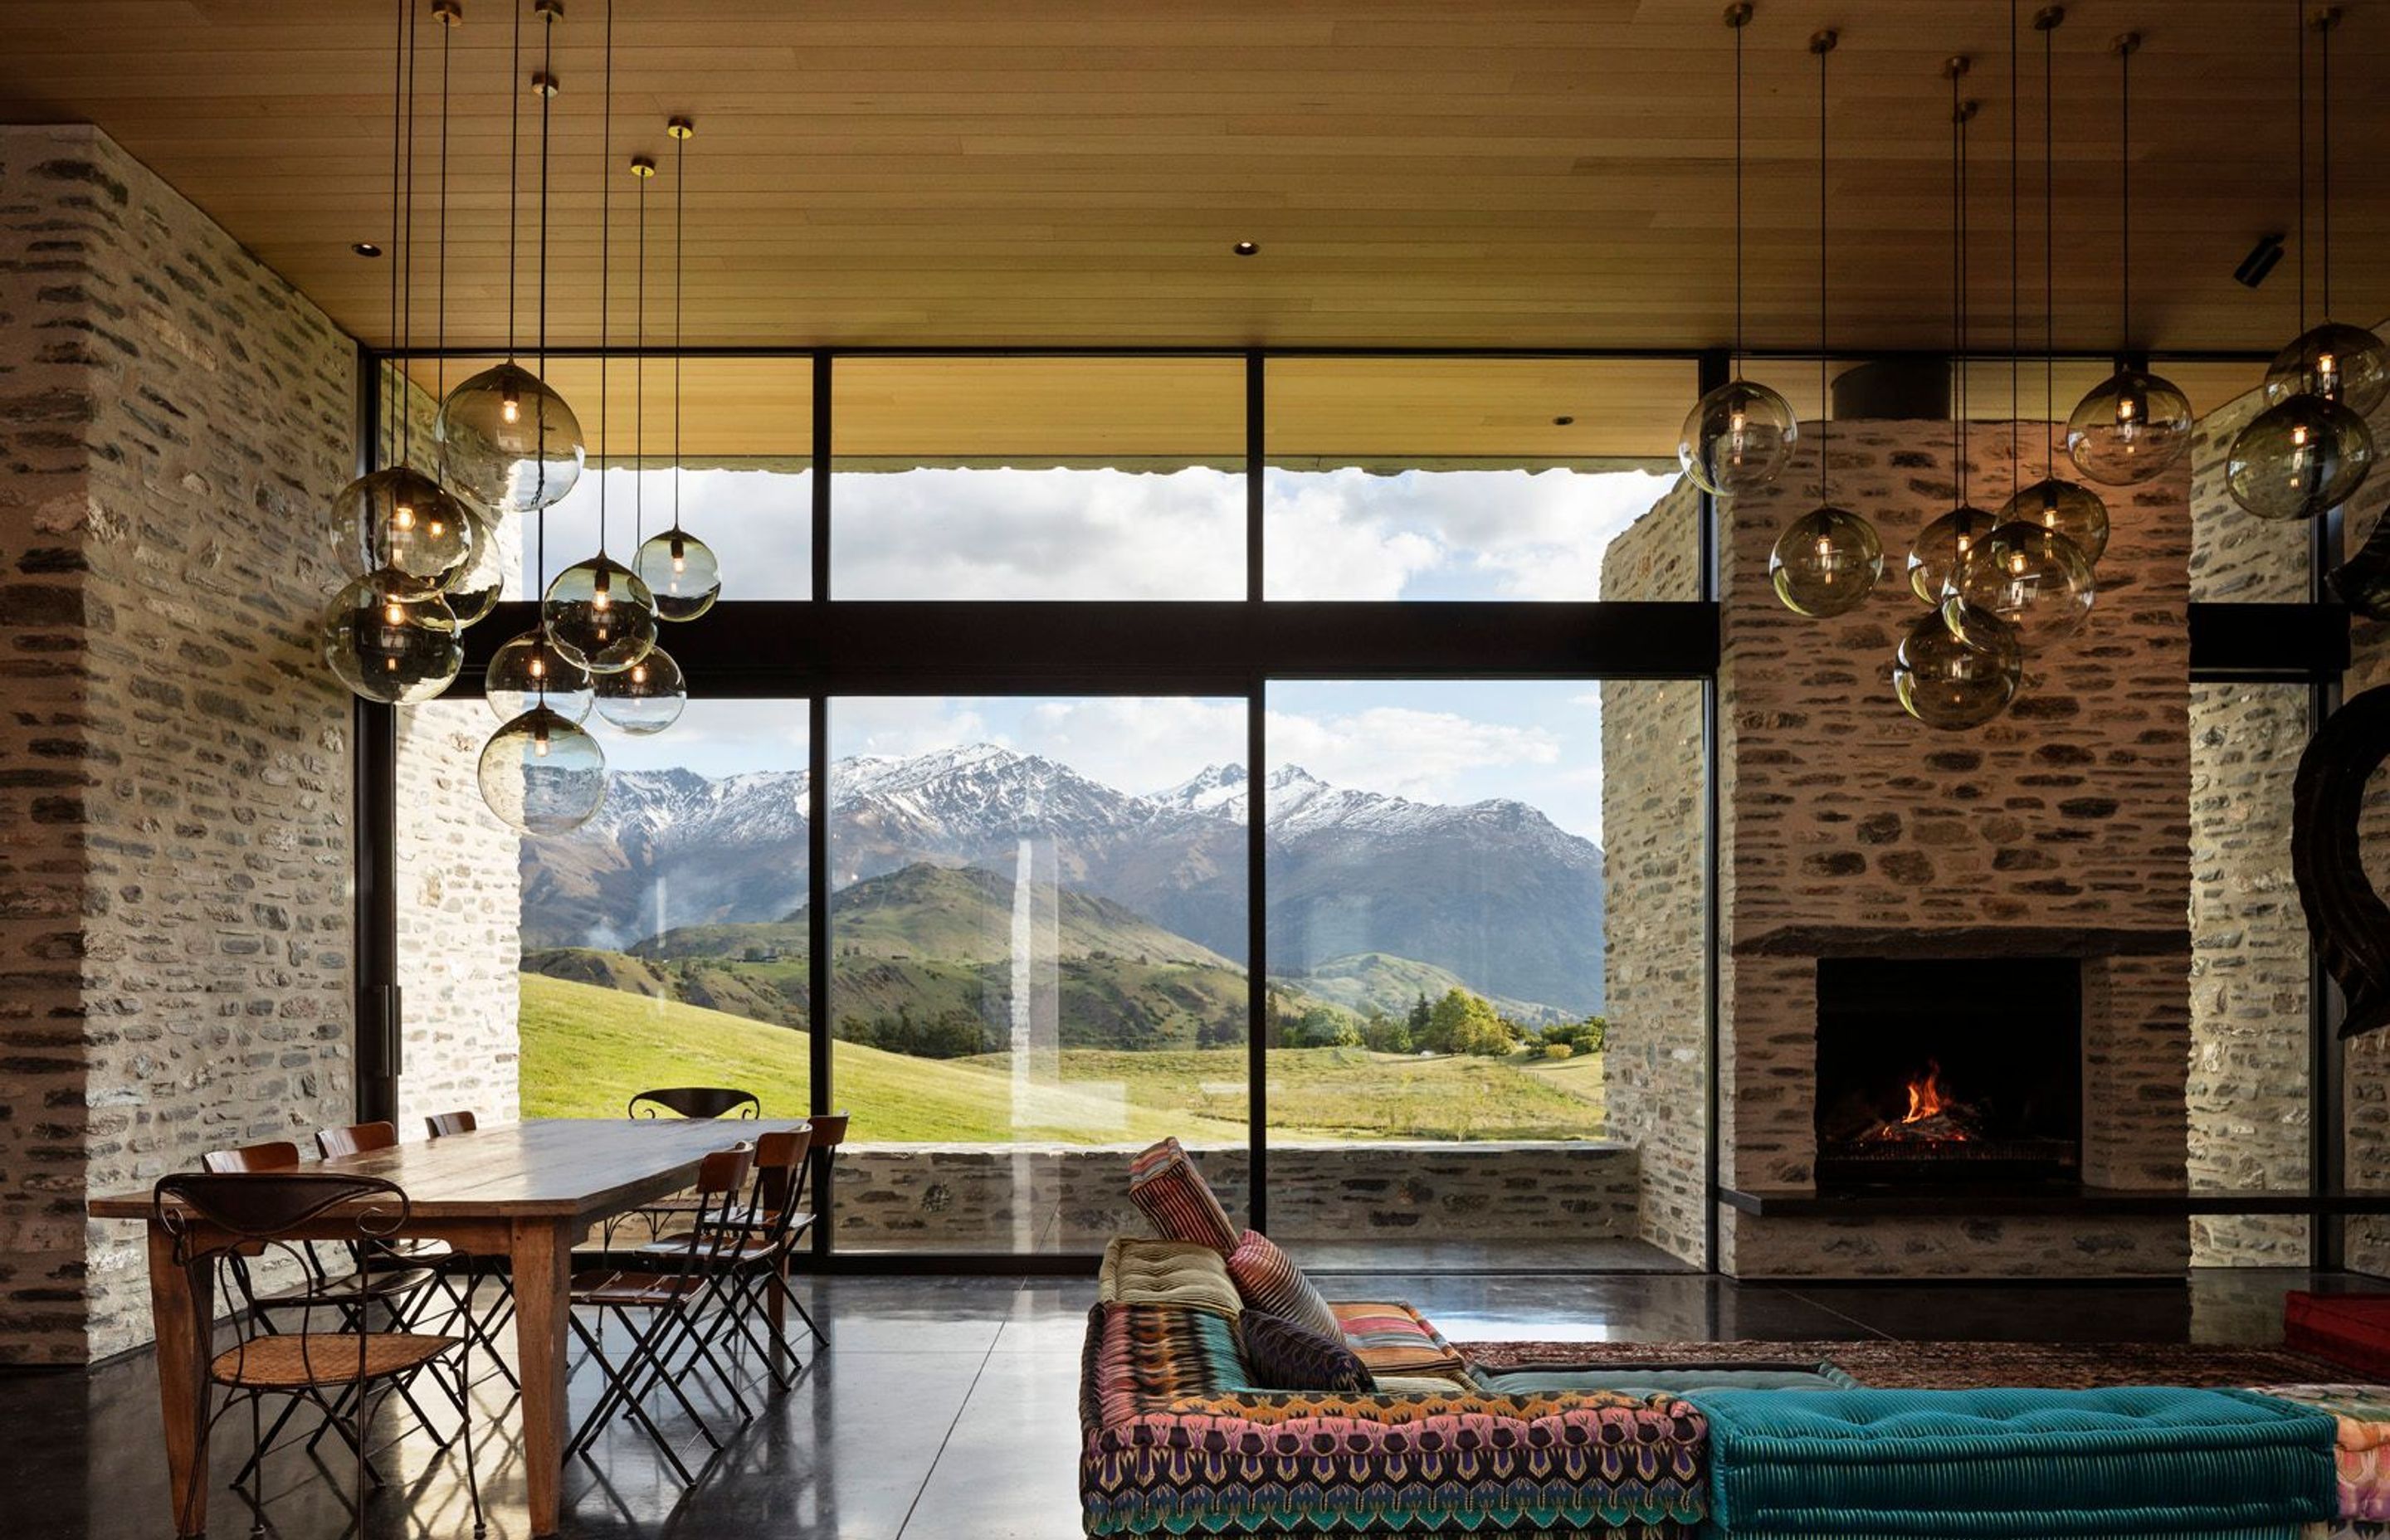 In the living space, glazing rises up from the floor and over the top of a stone chimney, washing sunlight over the interior to accentuating the rich texture of the schist.